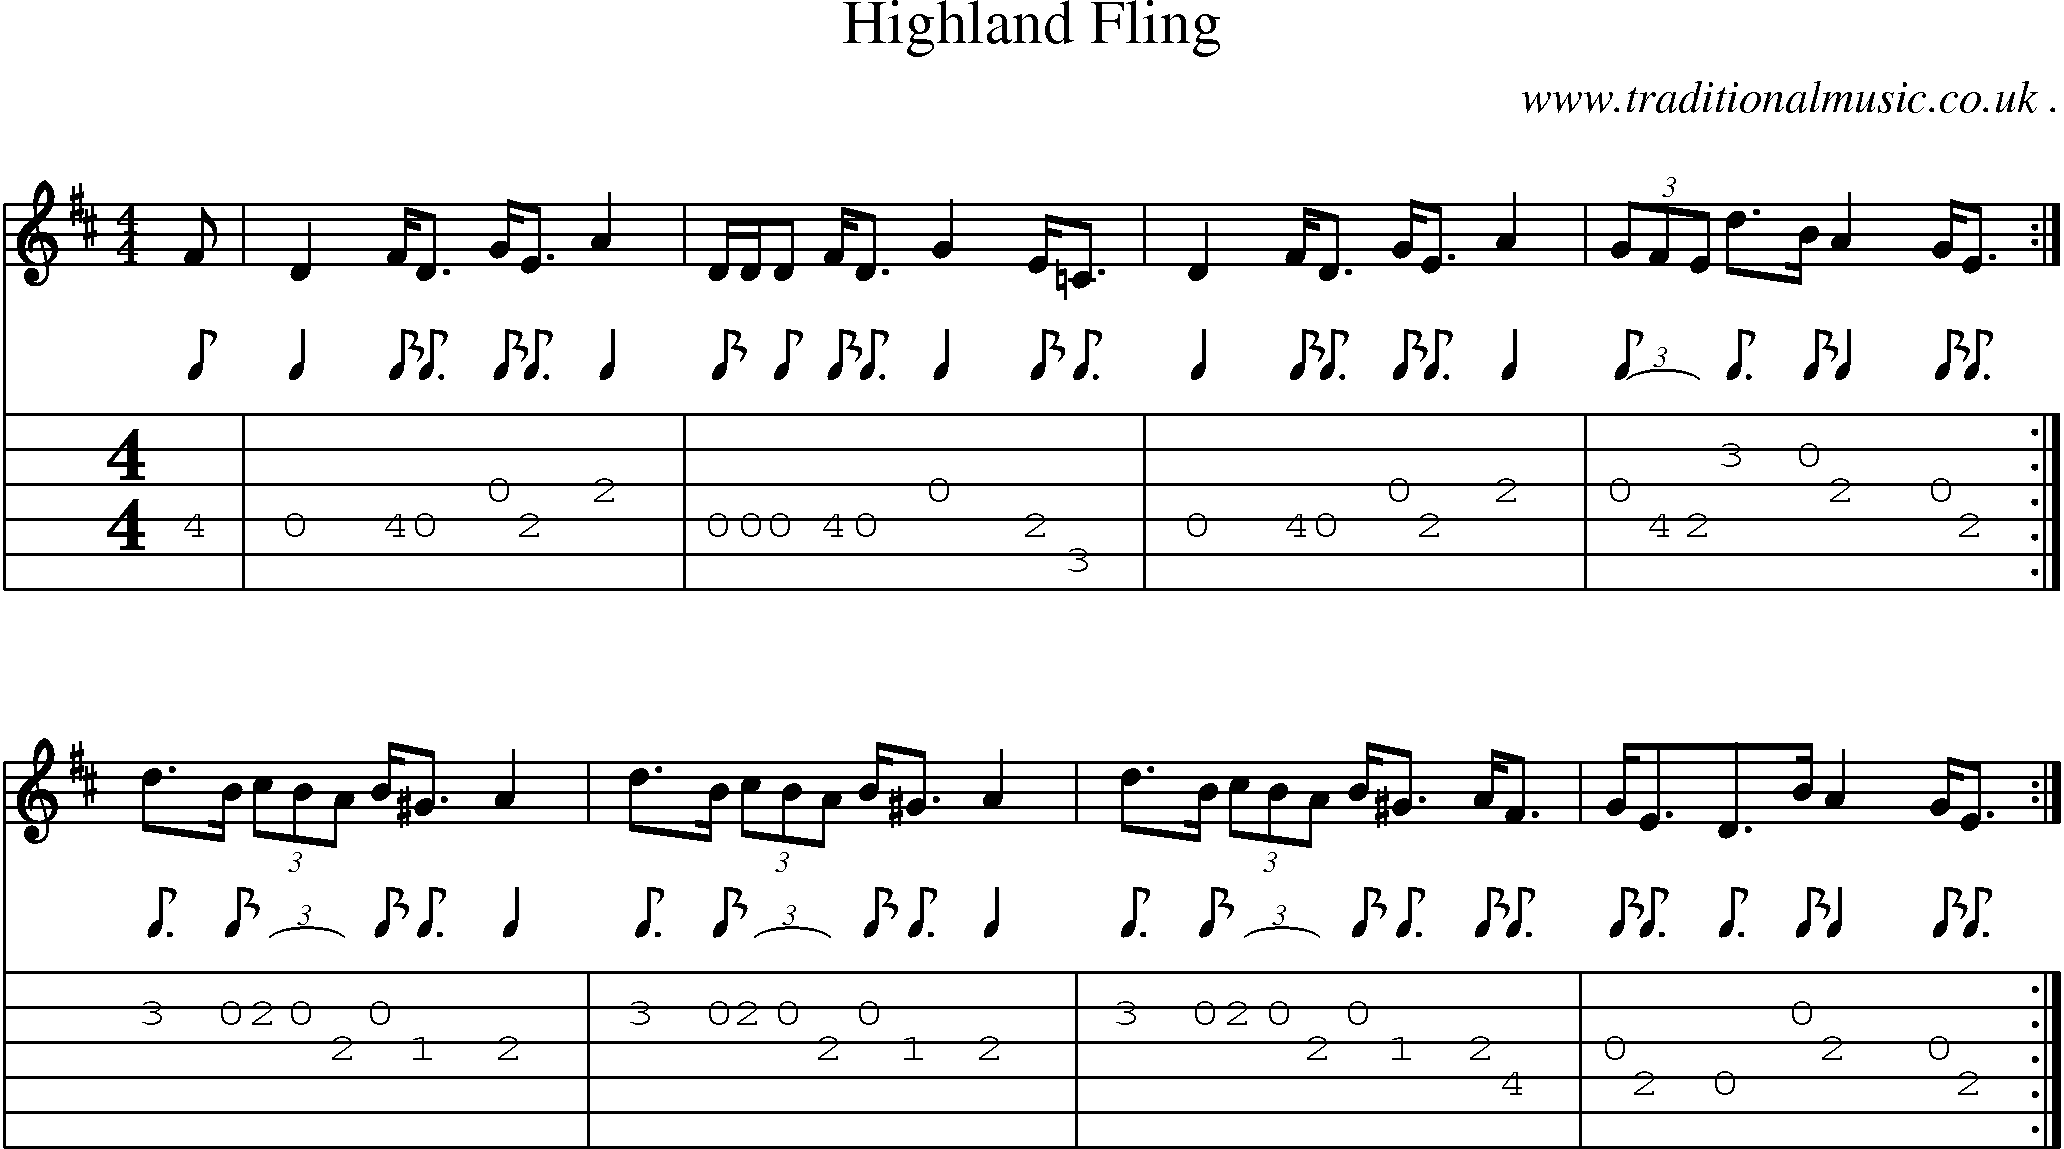 Sheet-music  score, Chords and Guitar Tabs for Highland Fling